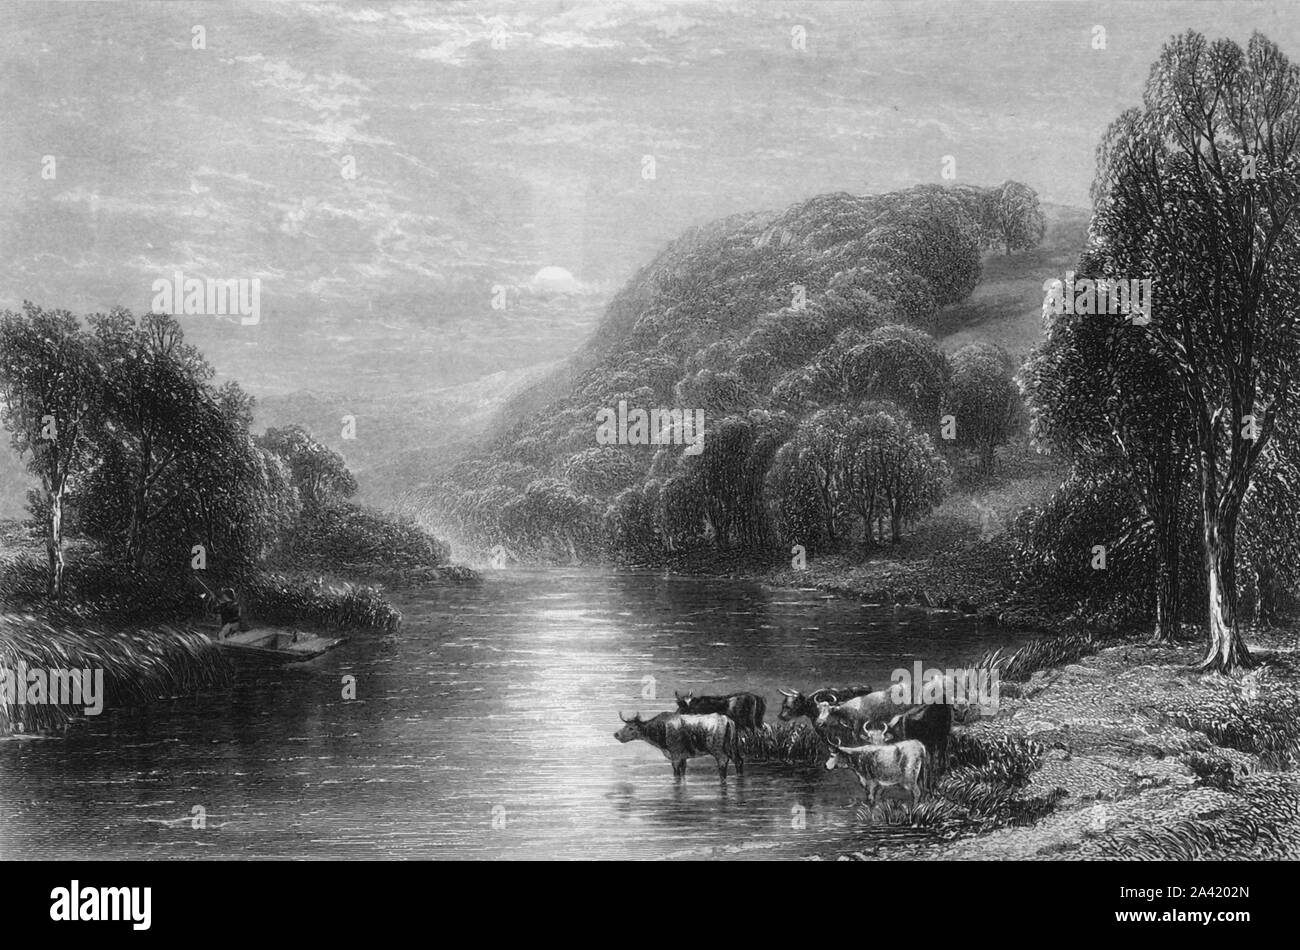 'On the Dart, near Totnes', c1870. The River Dart in Devon becomes tidal at Totnes. From &quot;Picturesque Europe - The British Isles, Vol. II&quot;. [Cassell, Petter &amp; Galpin, London, c1870] Stock Photo